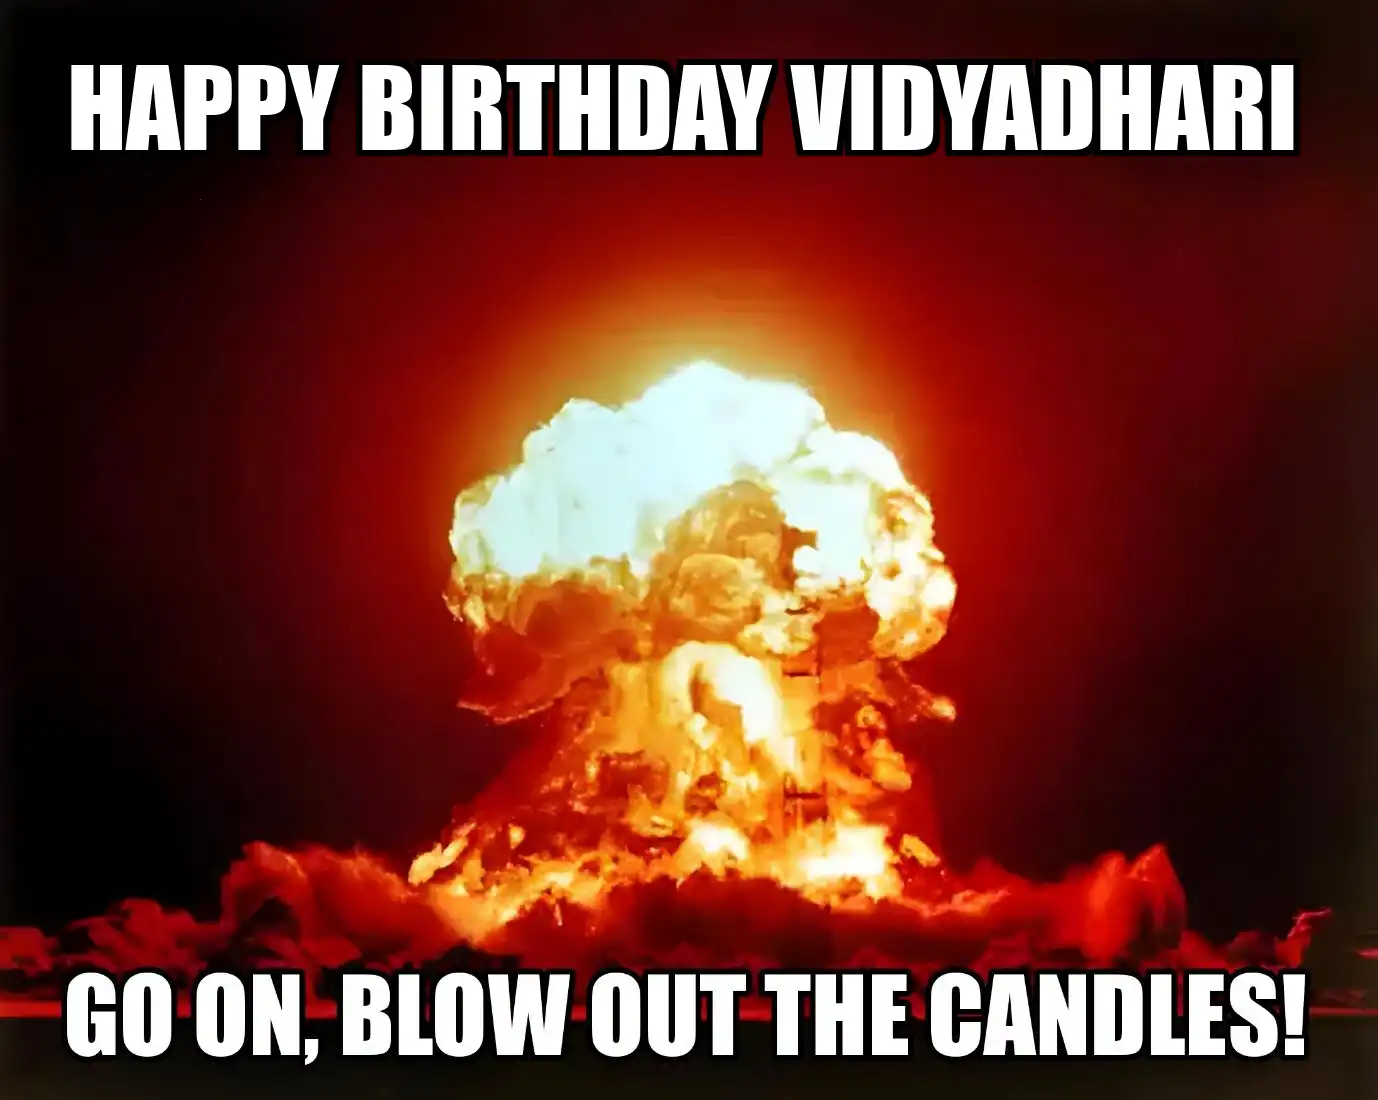 Happy Birthday Vidyadhari Go On Blow Out The Candles Meme